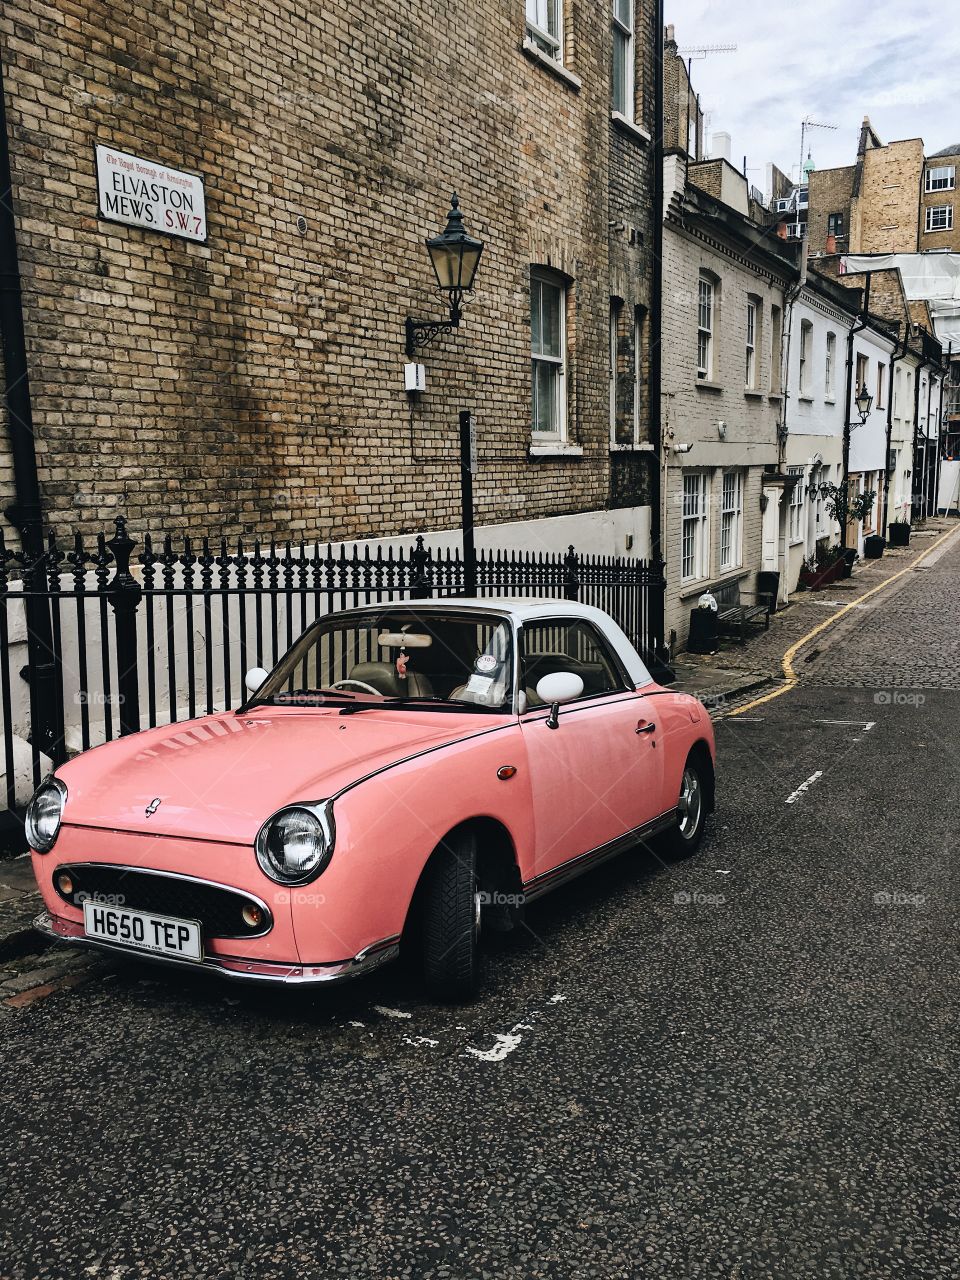 Pink Figaro car on a cobblestone street in London. Mews, old buildings and architecture. 